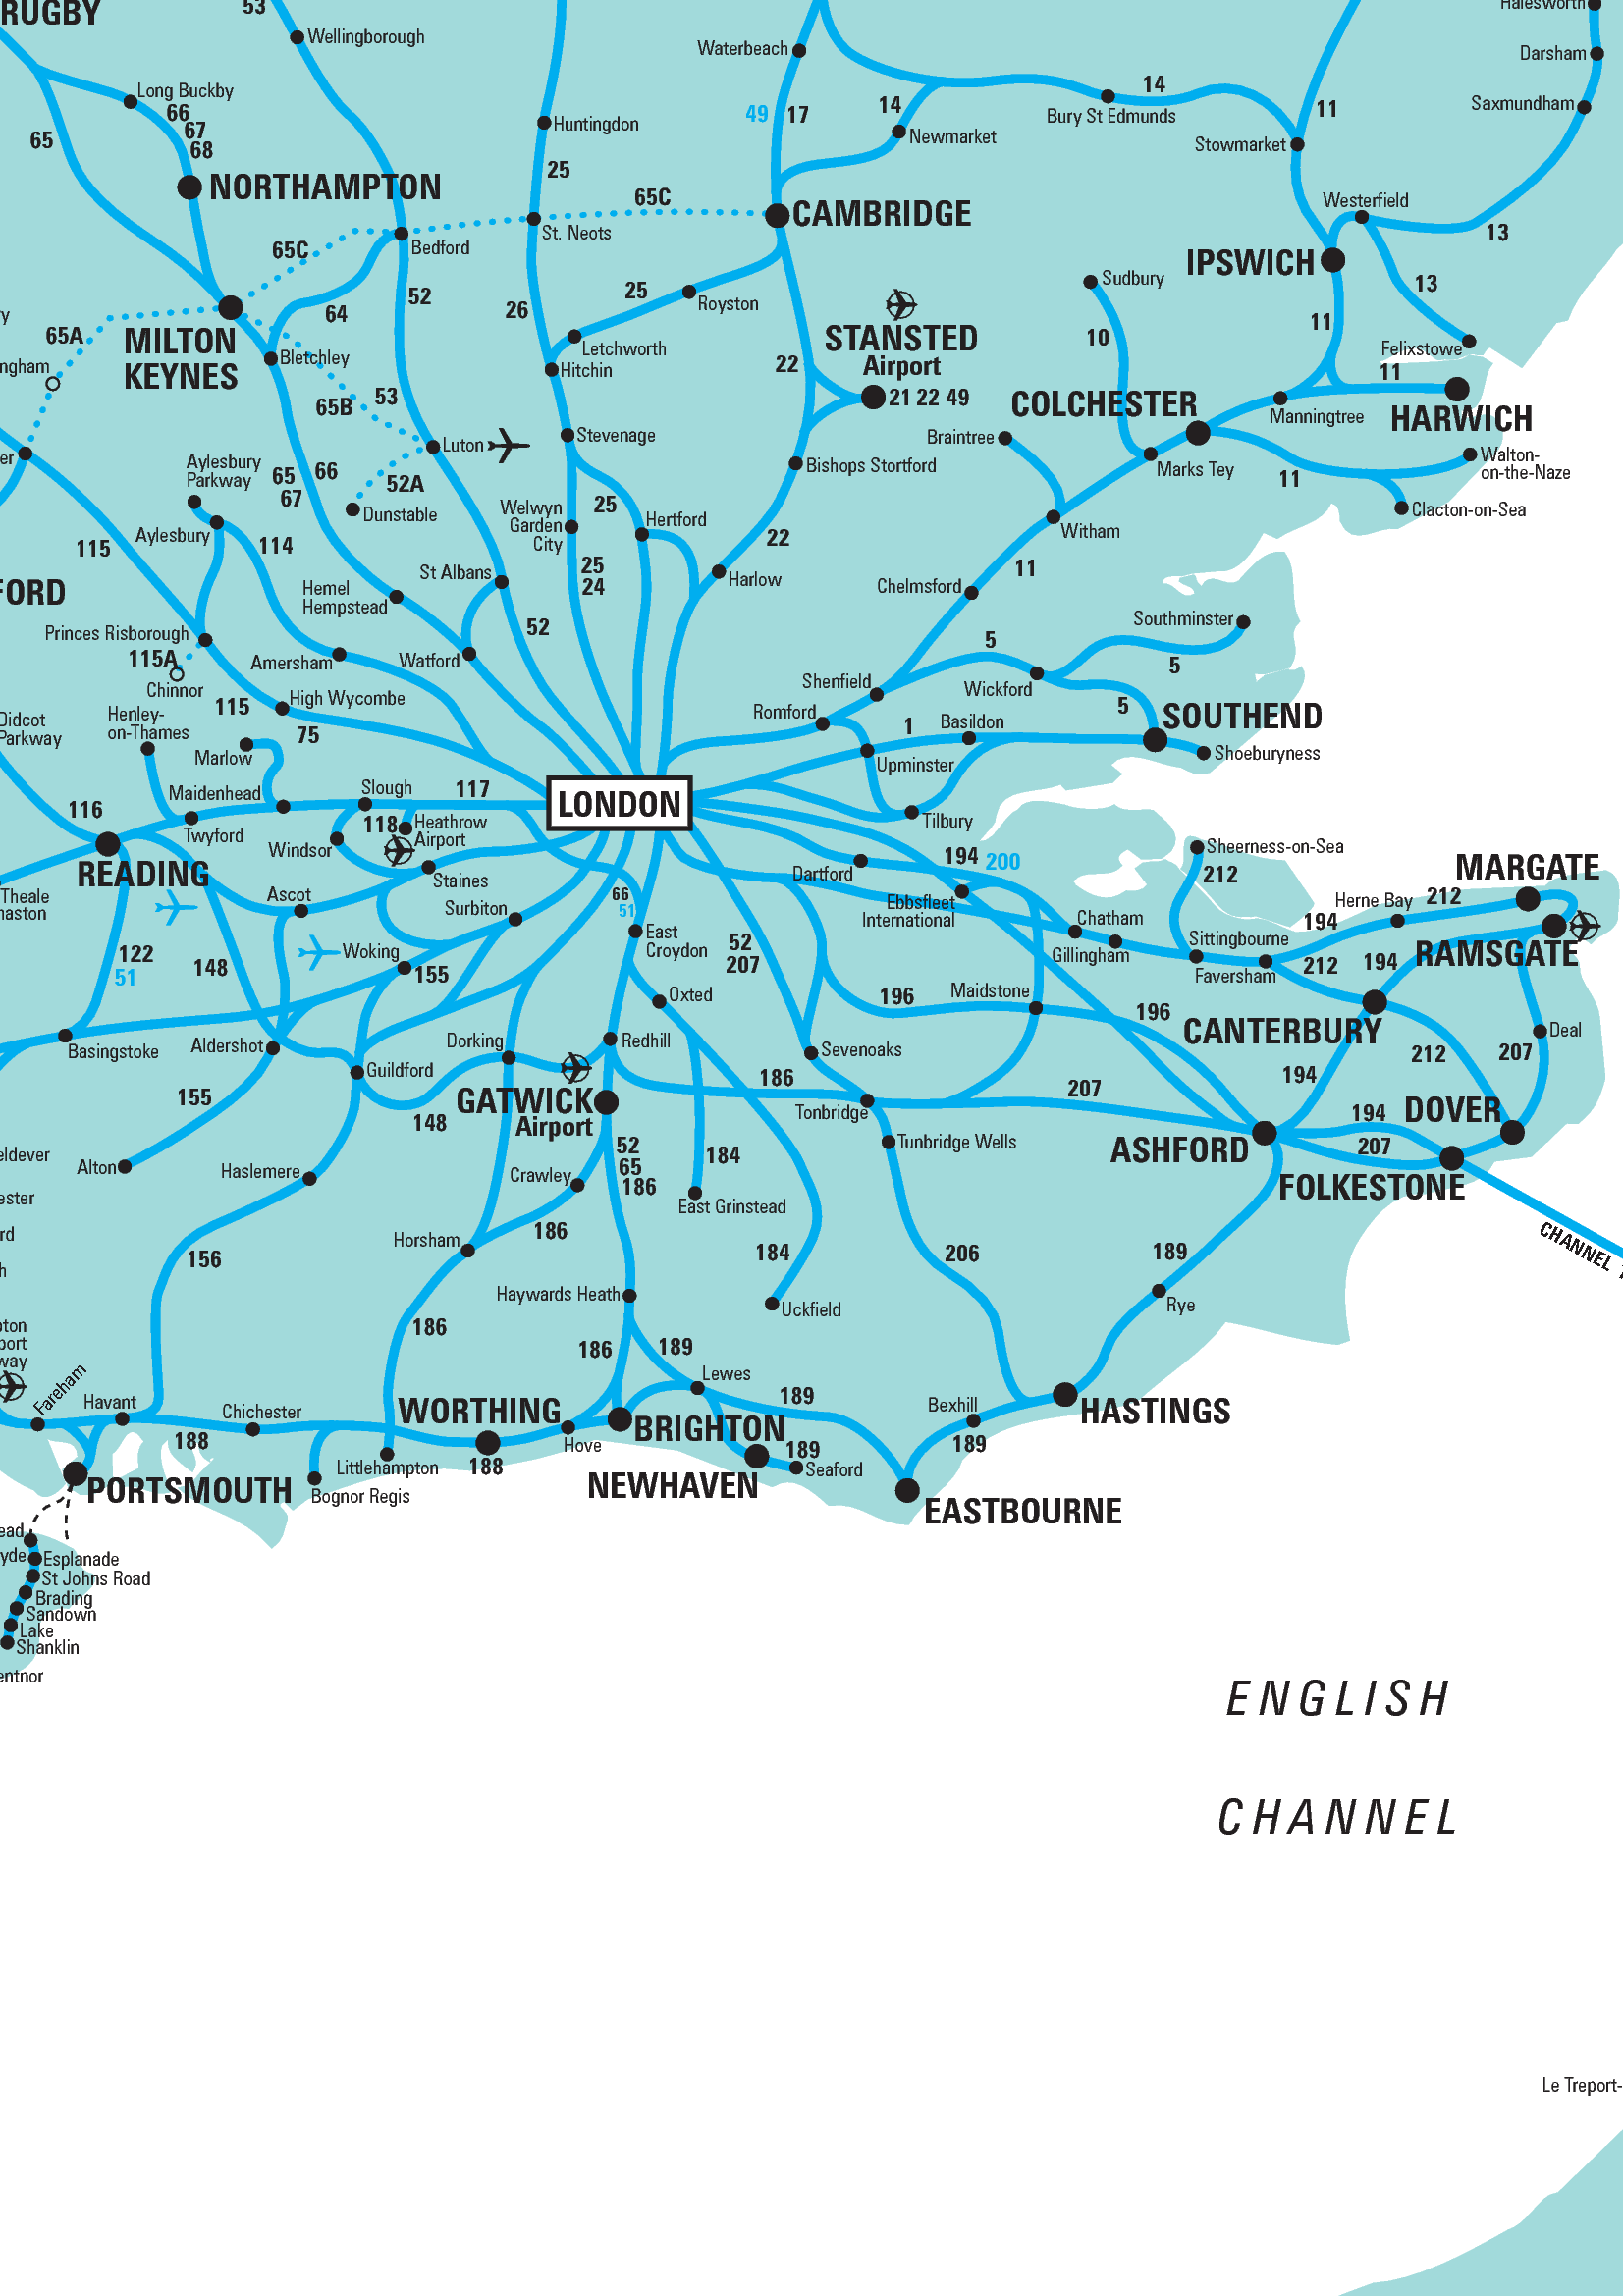 Rail map of the south-east of England